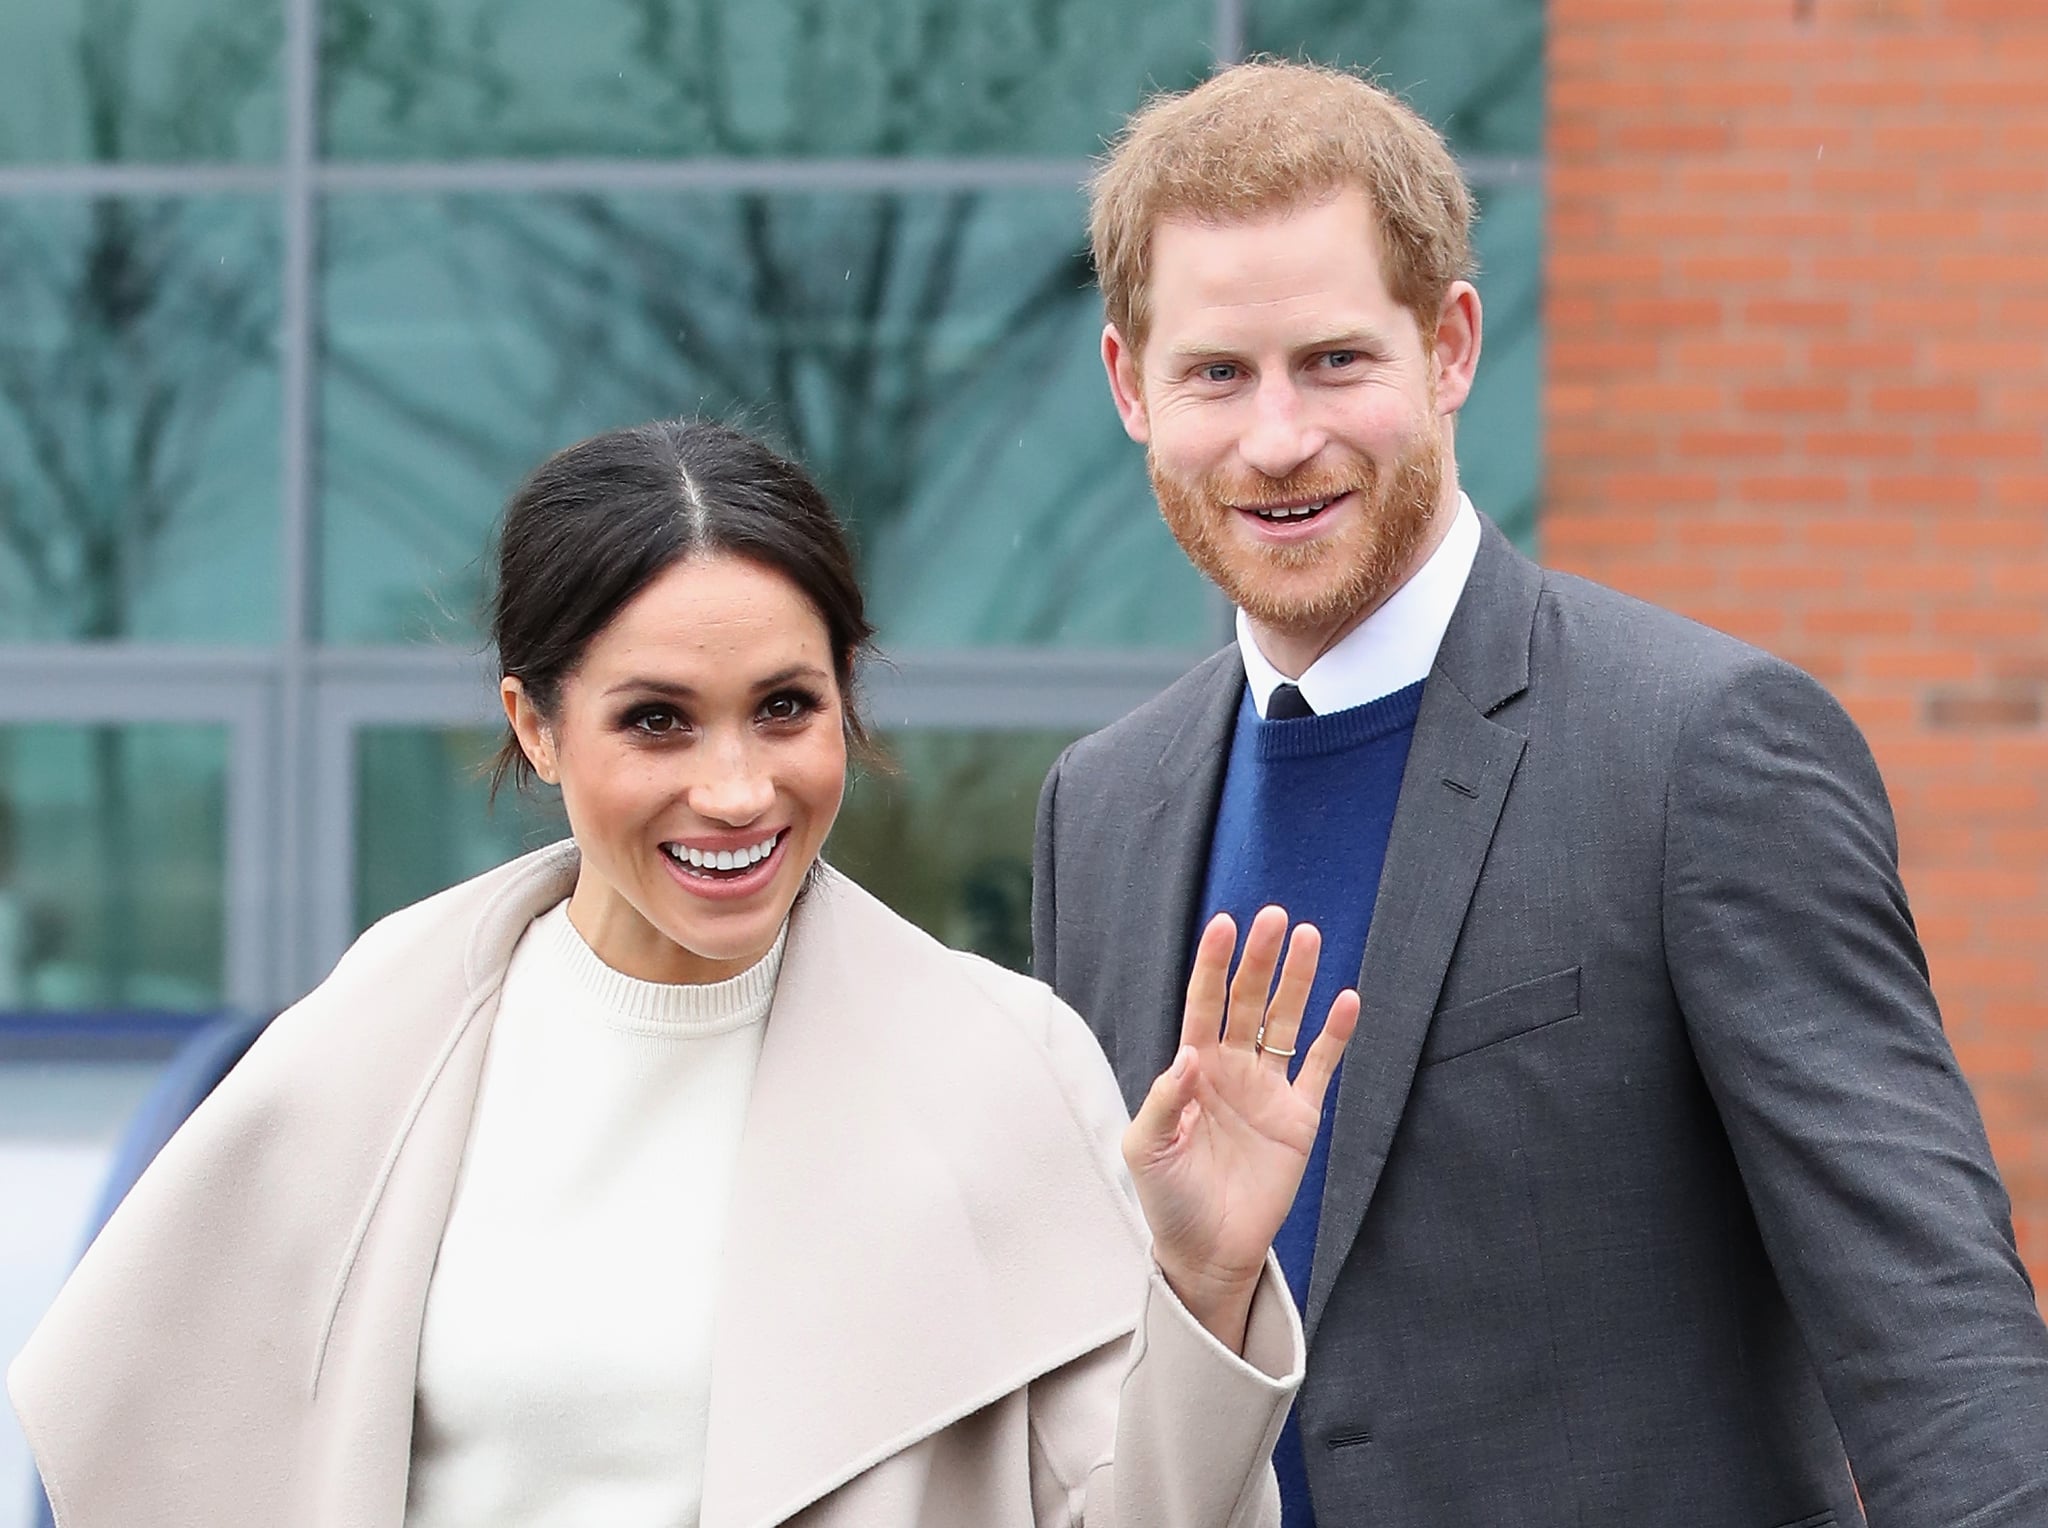 BELFAST, NORTHERN IRELAND - MARCH 23:  Prince Harry and Meghan Markle visit Catalyst Inc, a next generation science park, to meet young entrepreneurs and innovators on March 23, 2018 in Belfast, Nothern Ireland.  (Photo by Pool/Samir Hussein/WireImage)